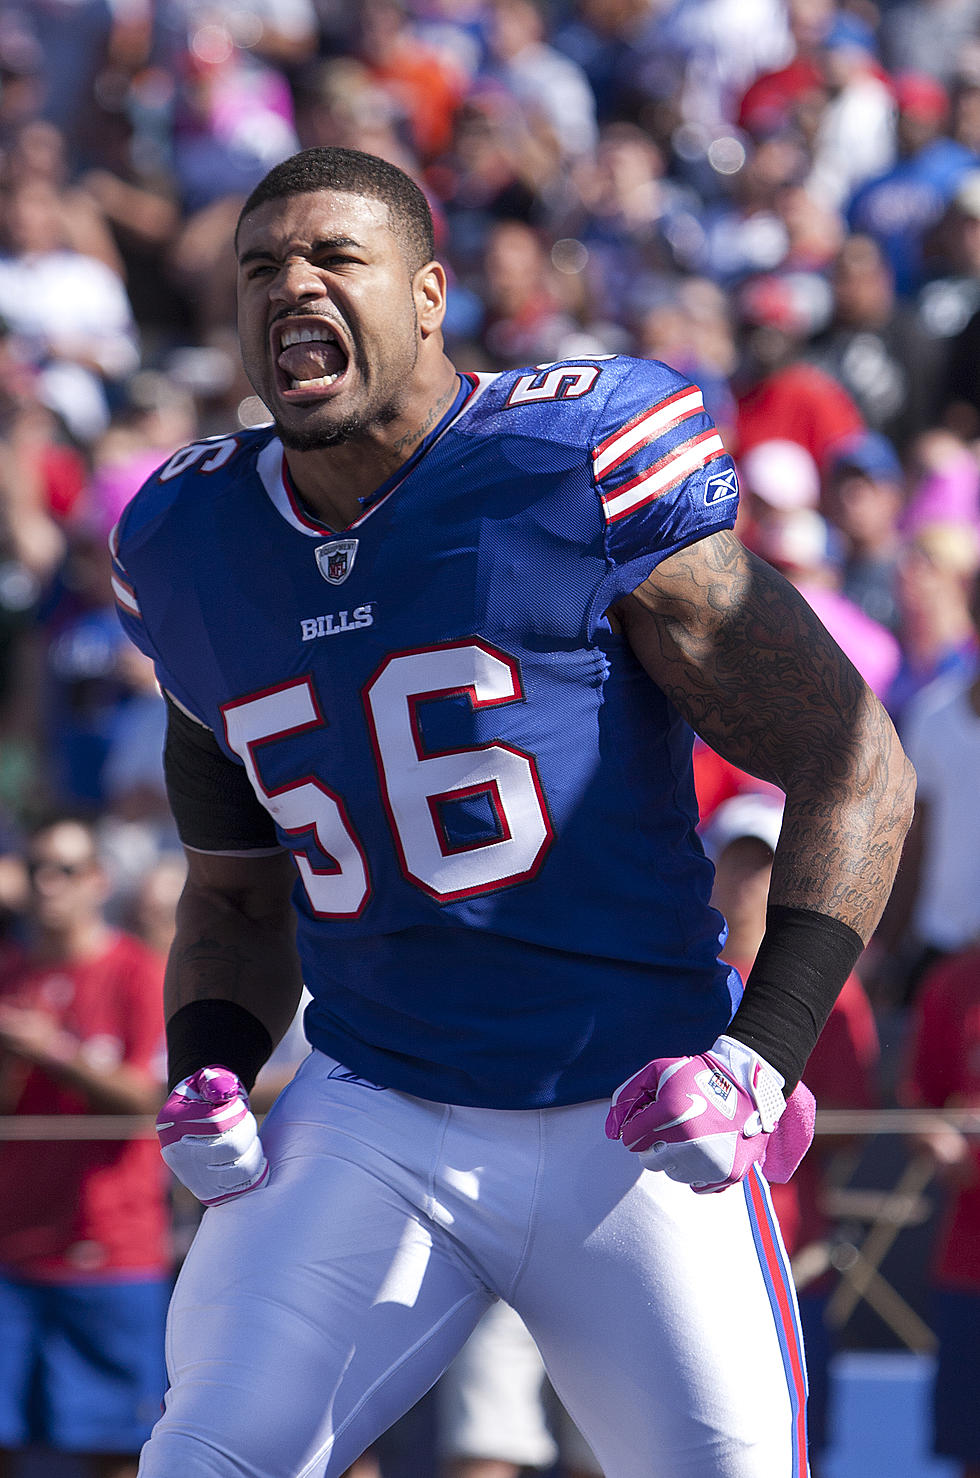 Can The Injured Buffalo Bills Add Another Win This Weekend?